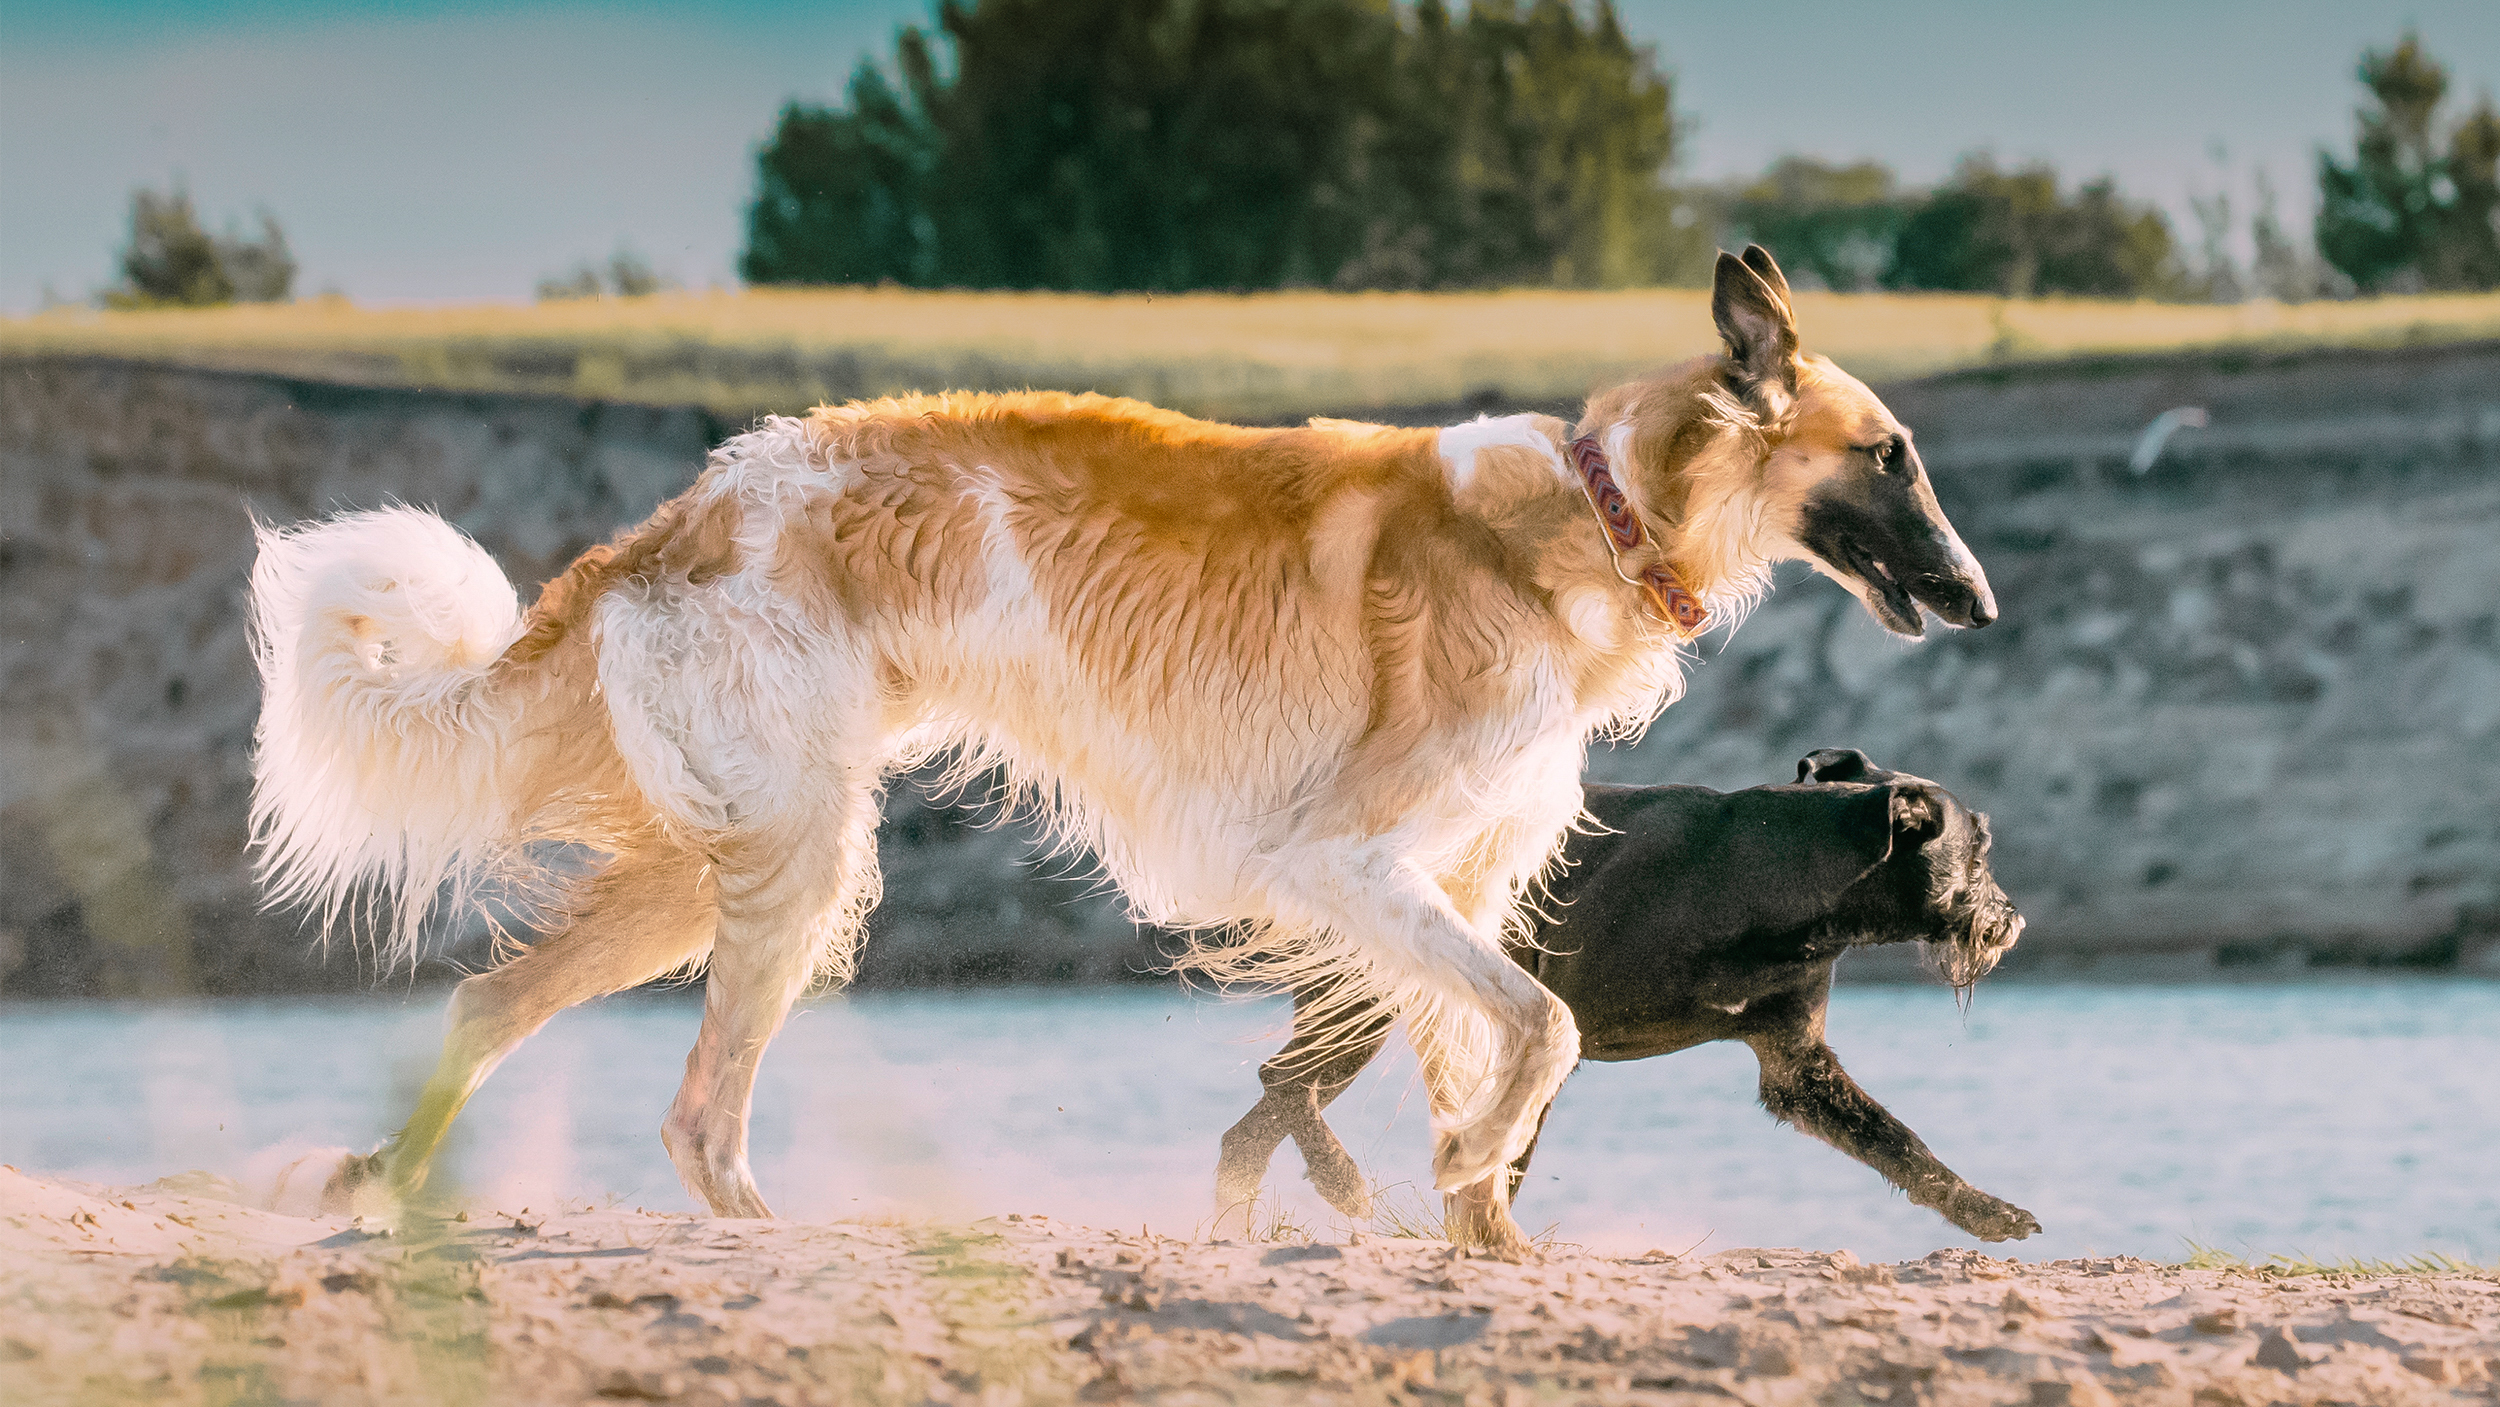 Adult Borzoi Running in sand by a river with a smaller black dog.